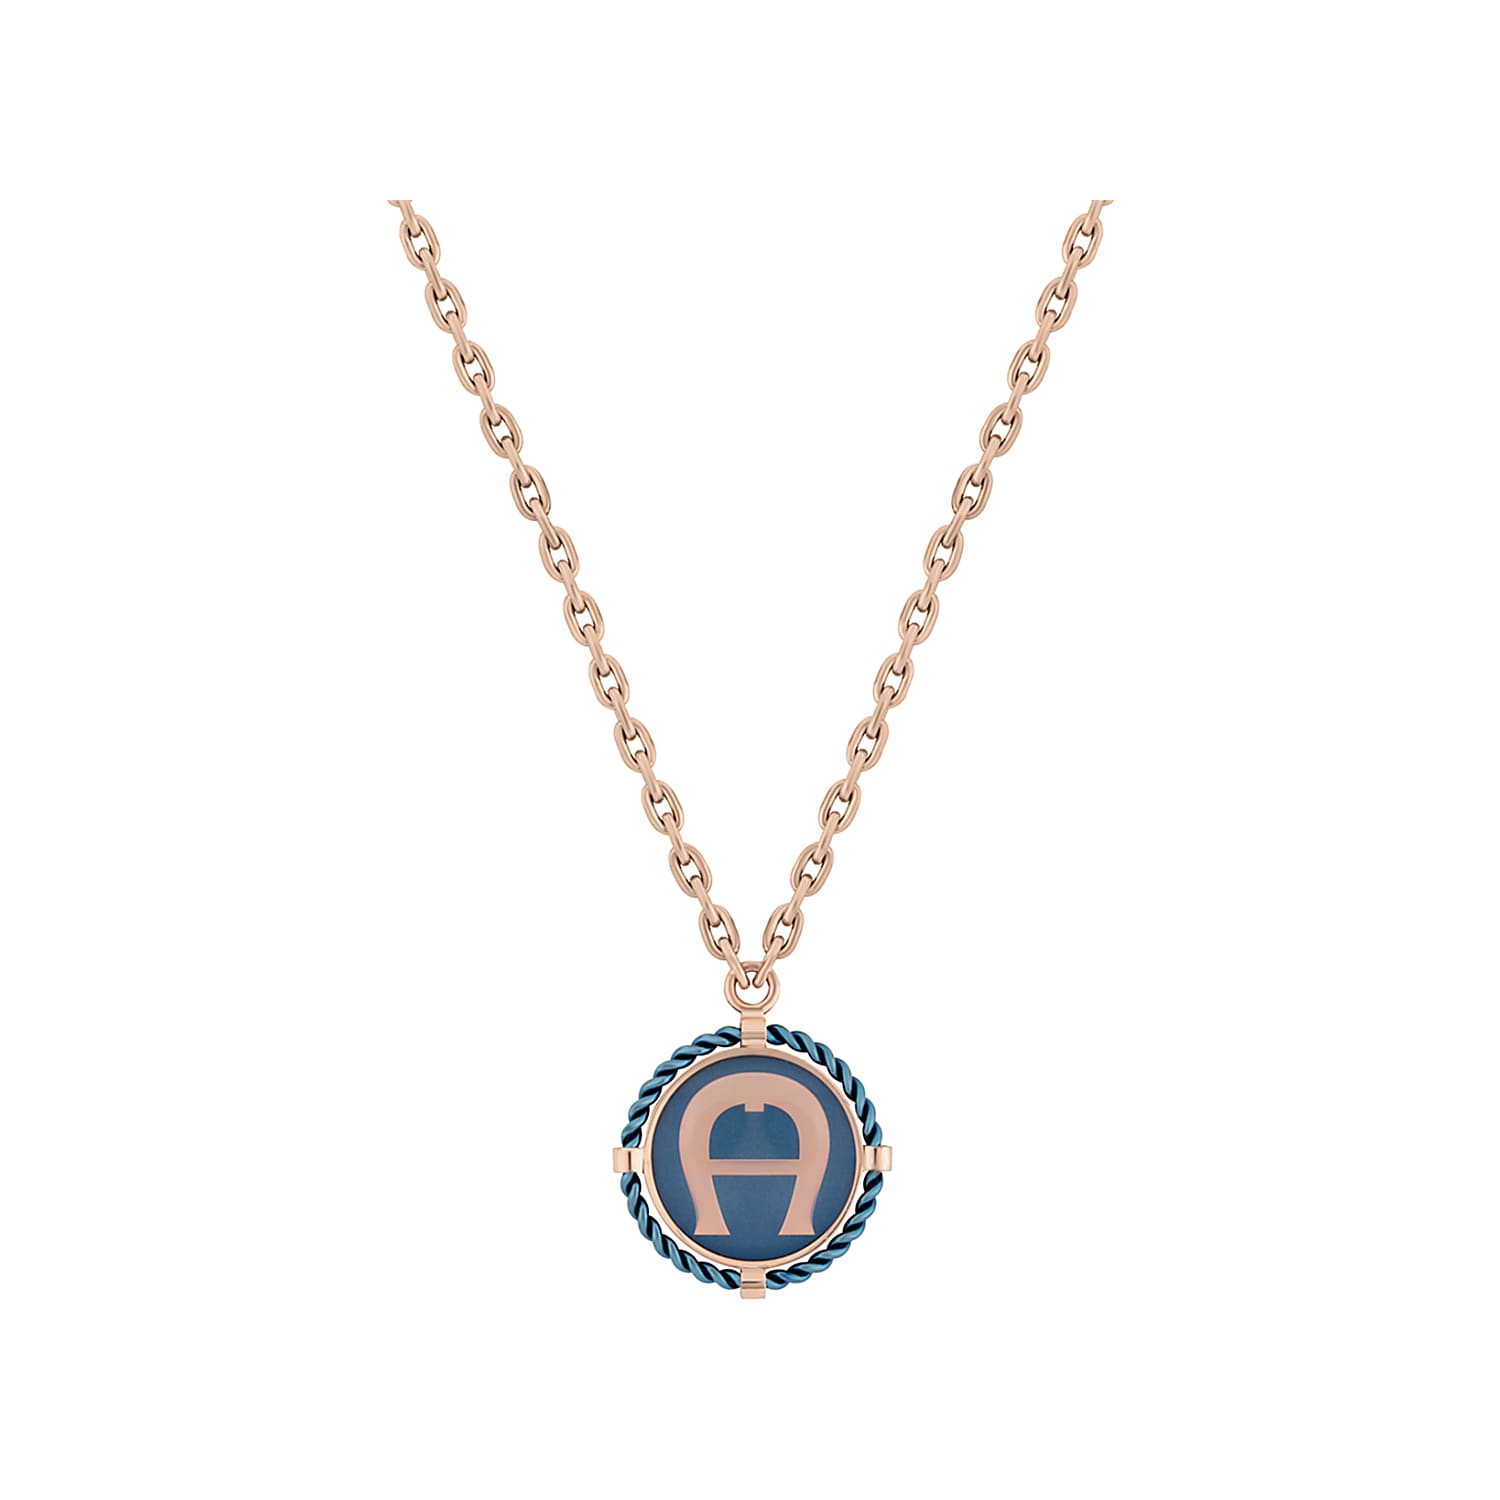 necklace rosegold with blue A-logo charm